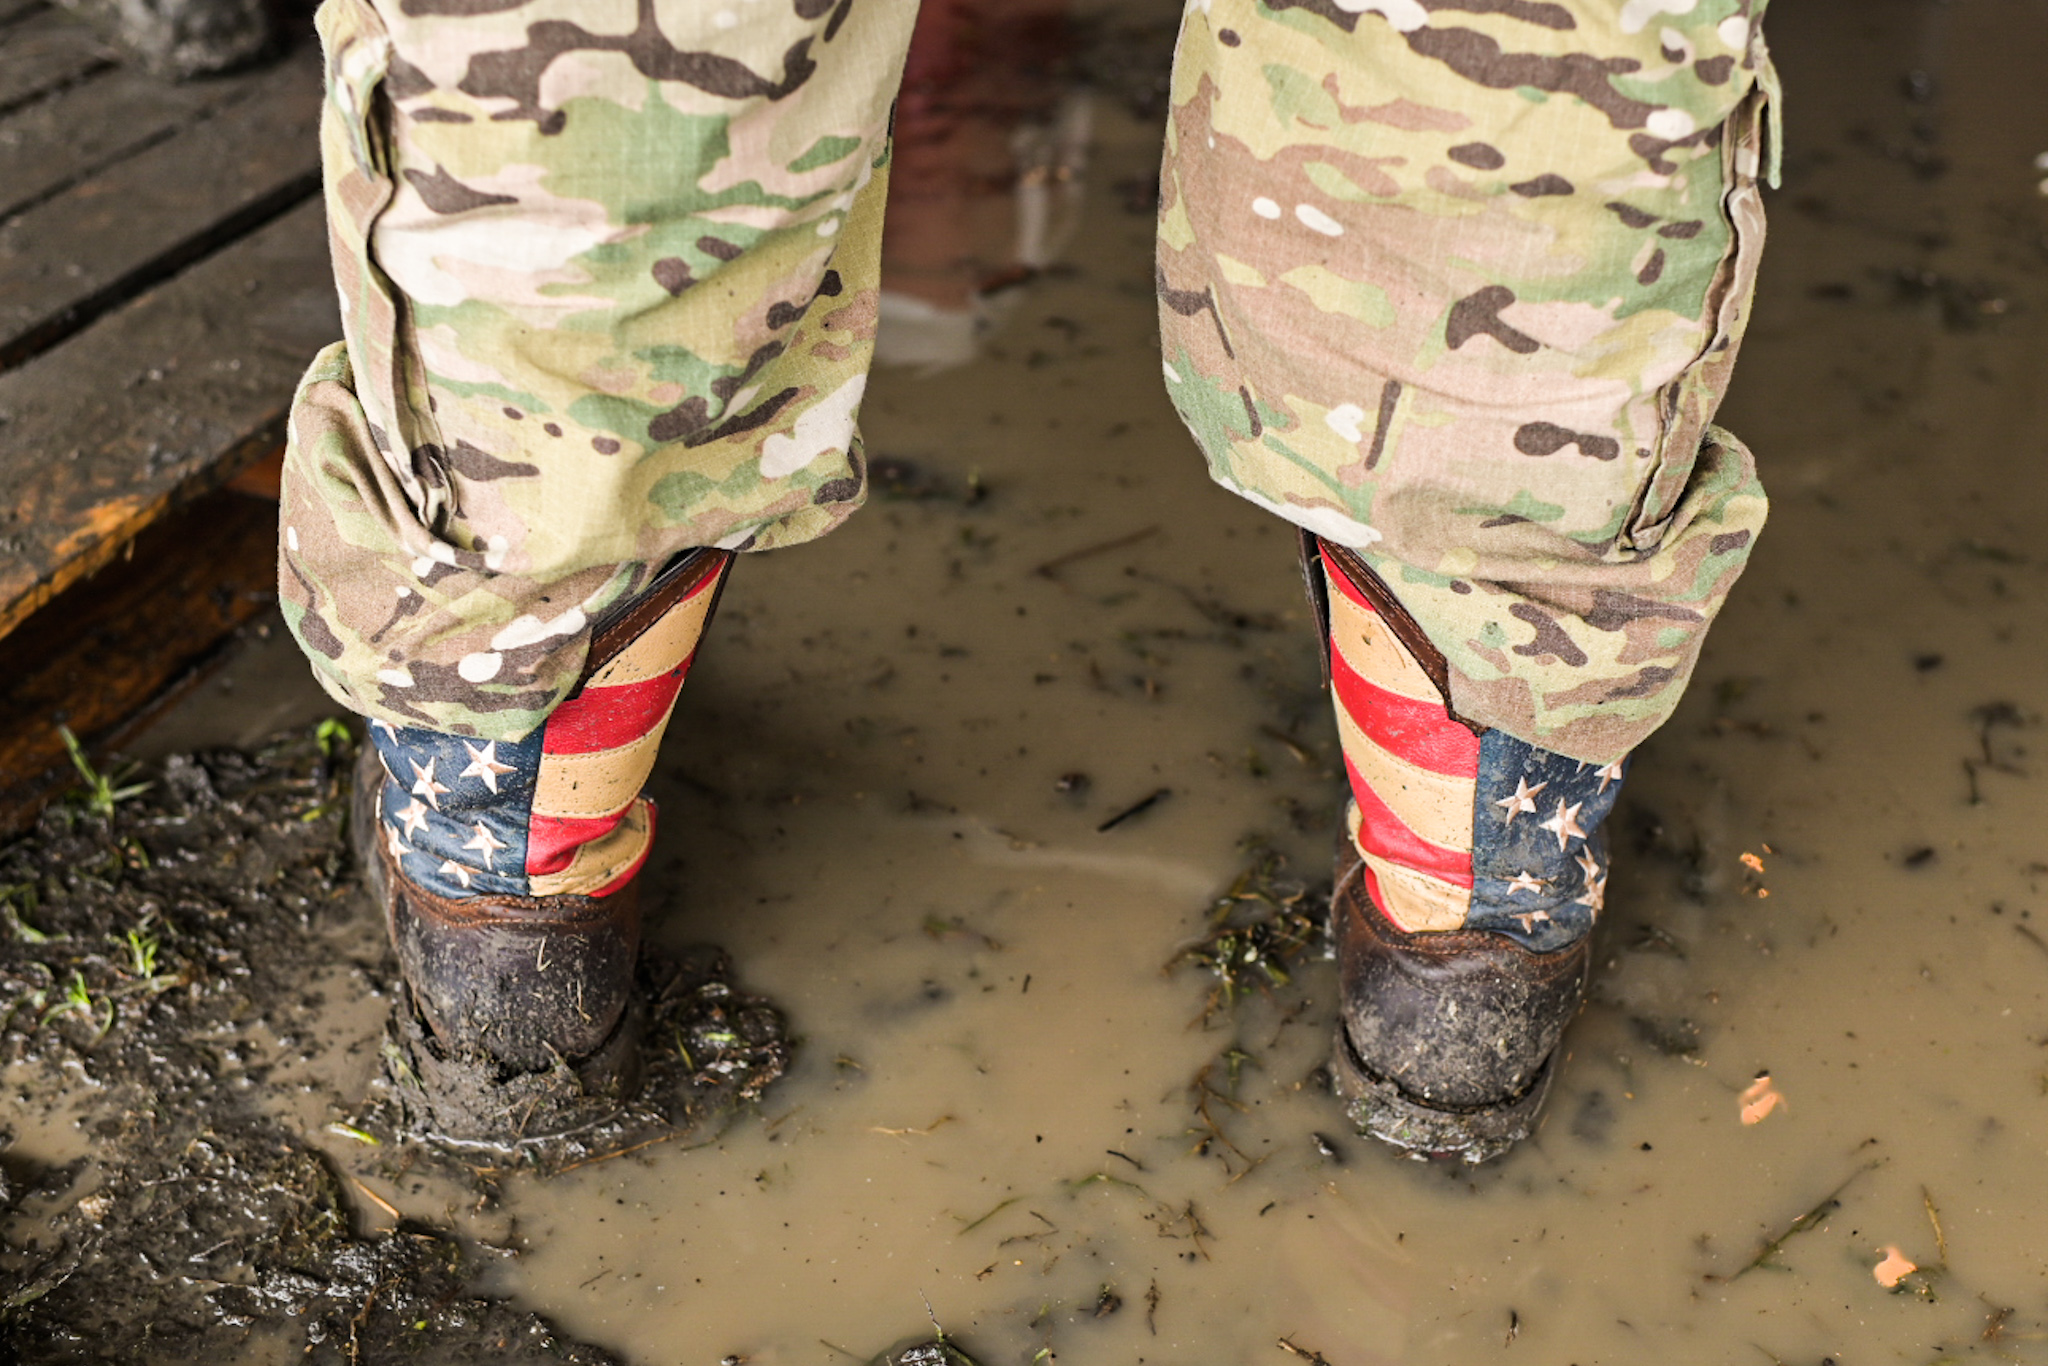 Boots ankle-deep in mud and rainwater in the Hog Dat Nation tent